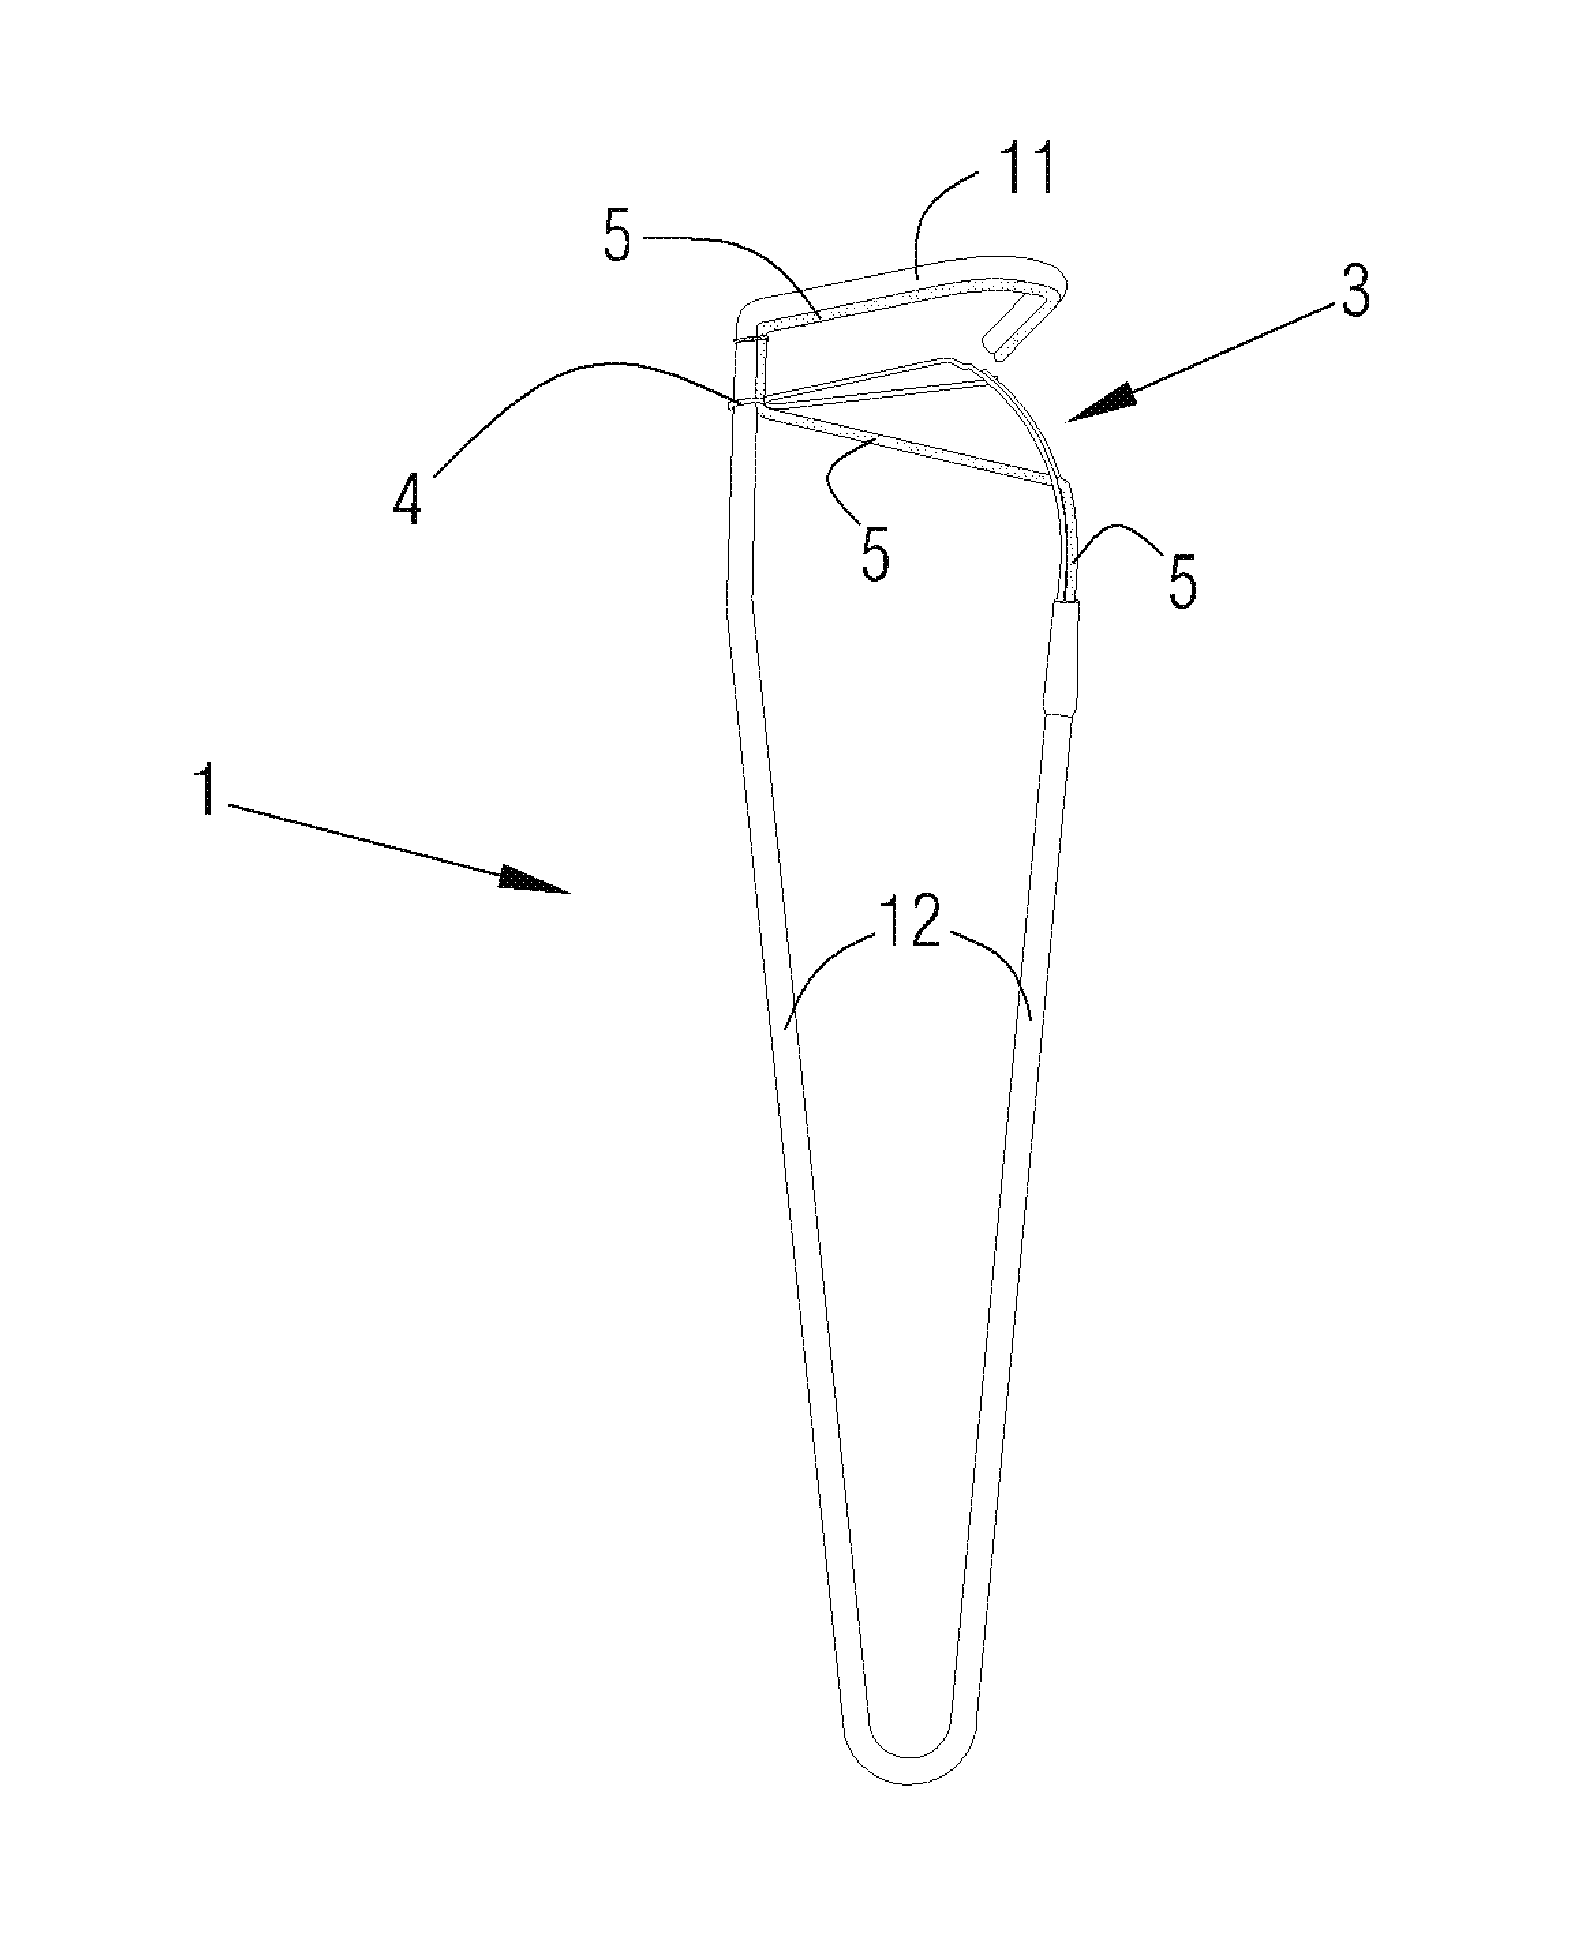 Constituent device for furniture